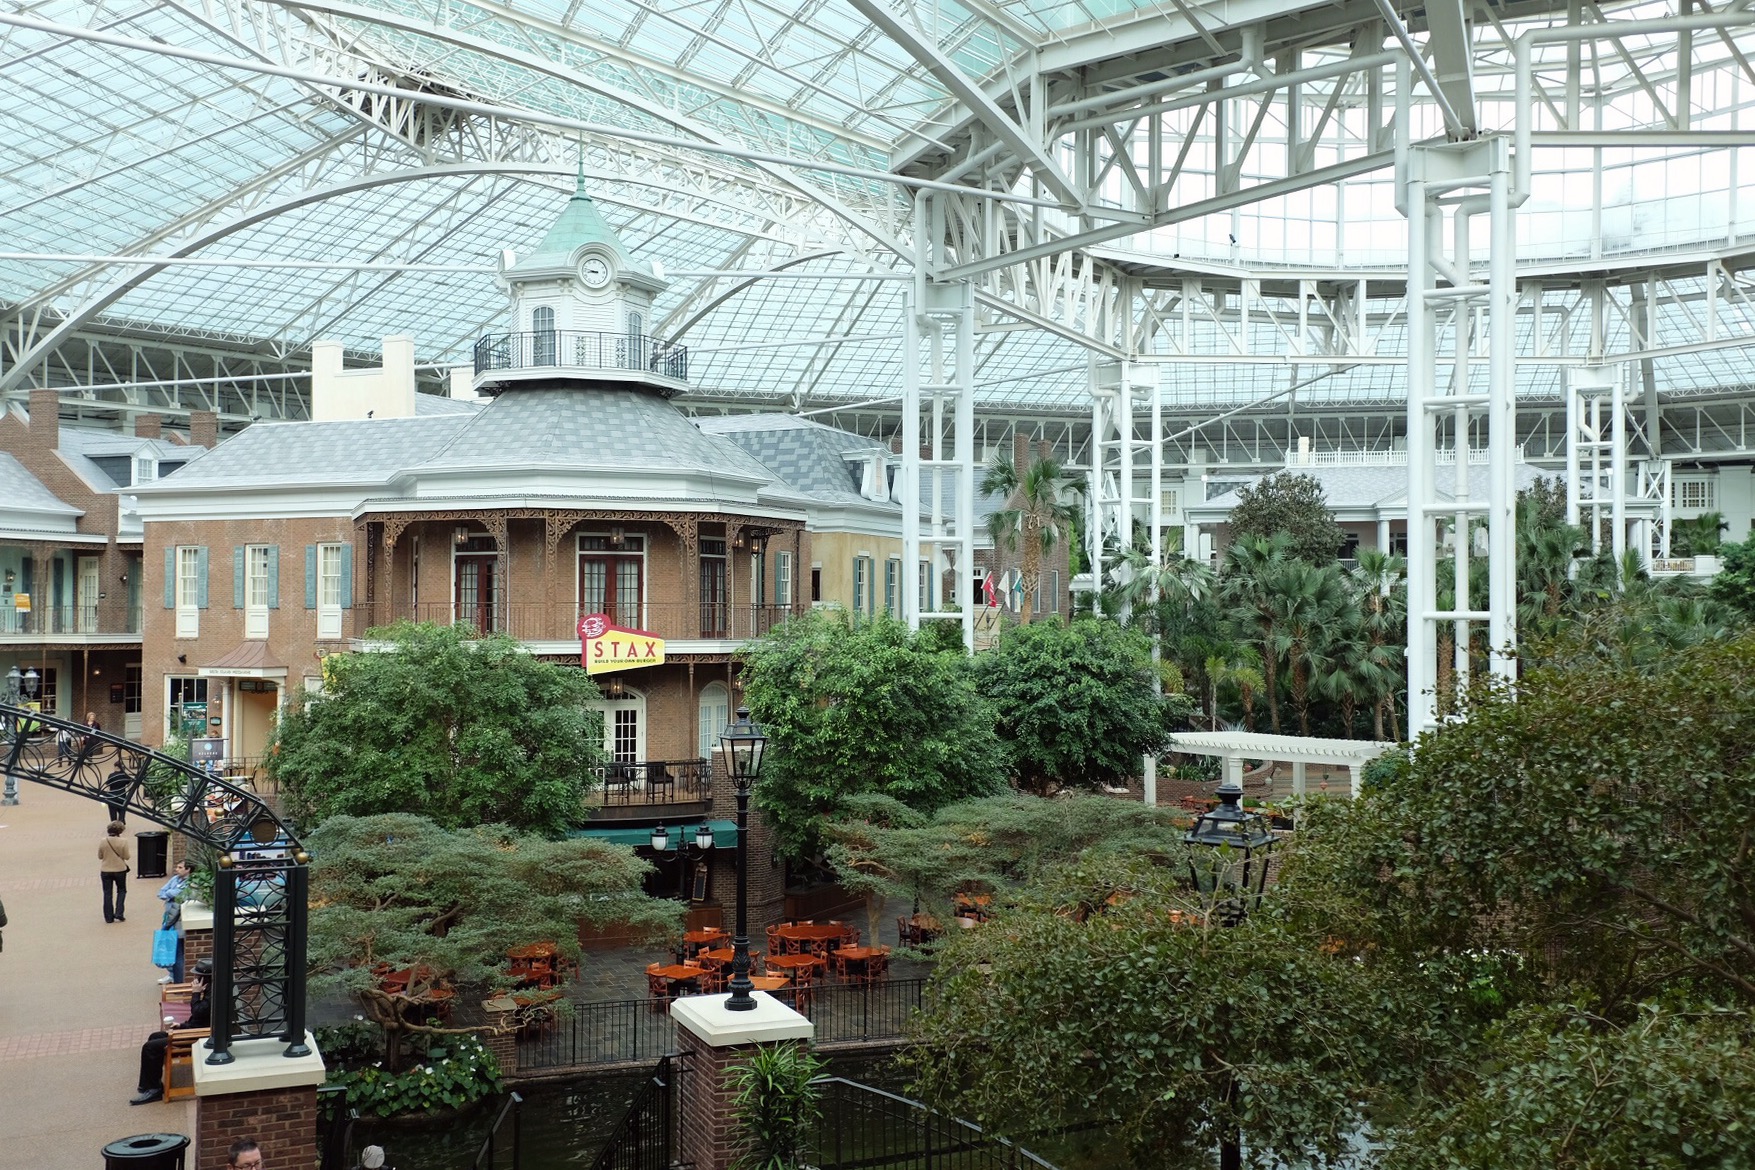  Everything took place in the amazingly beautiful Gaylord Opryland Hotel... 